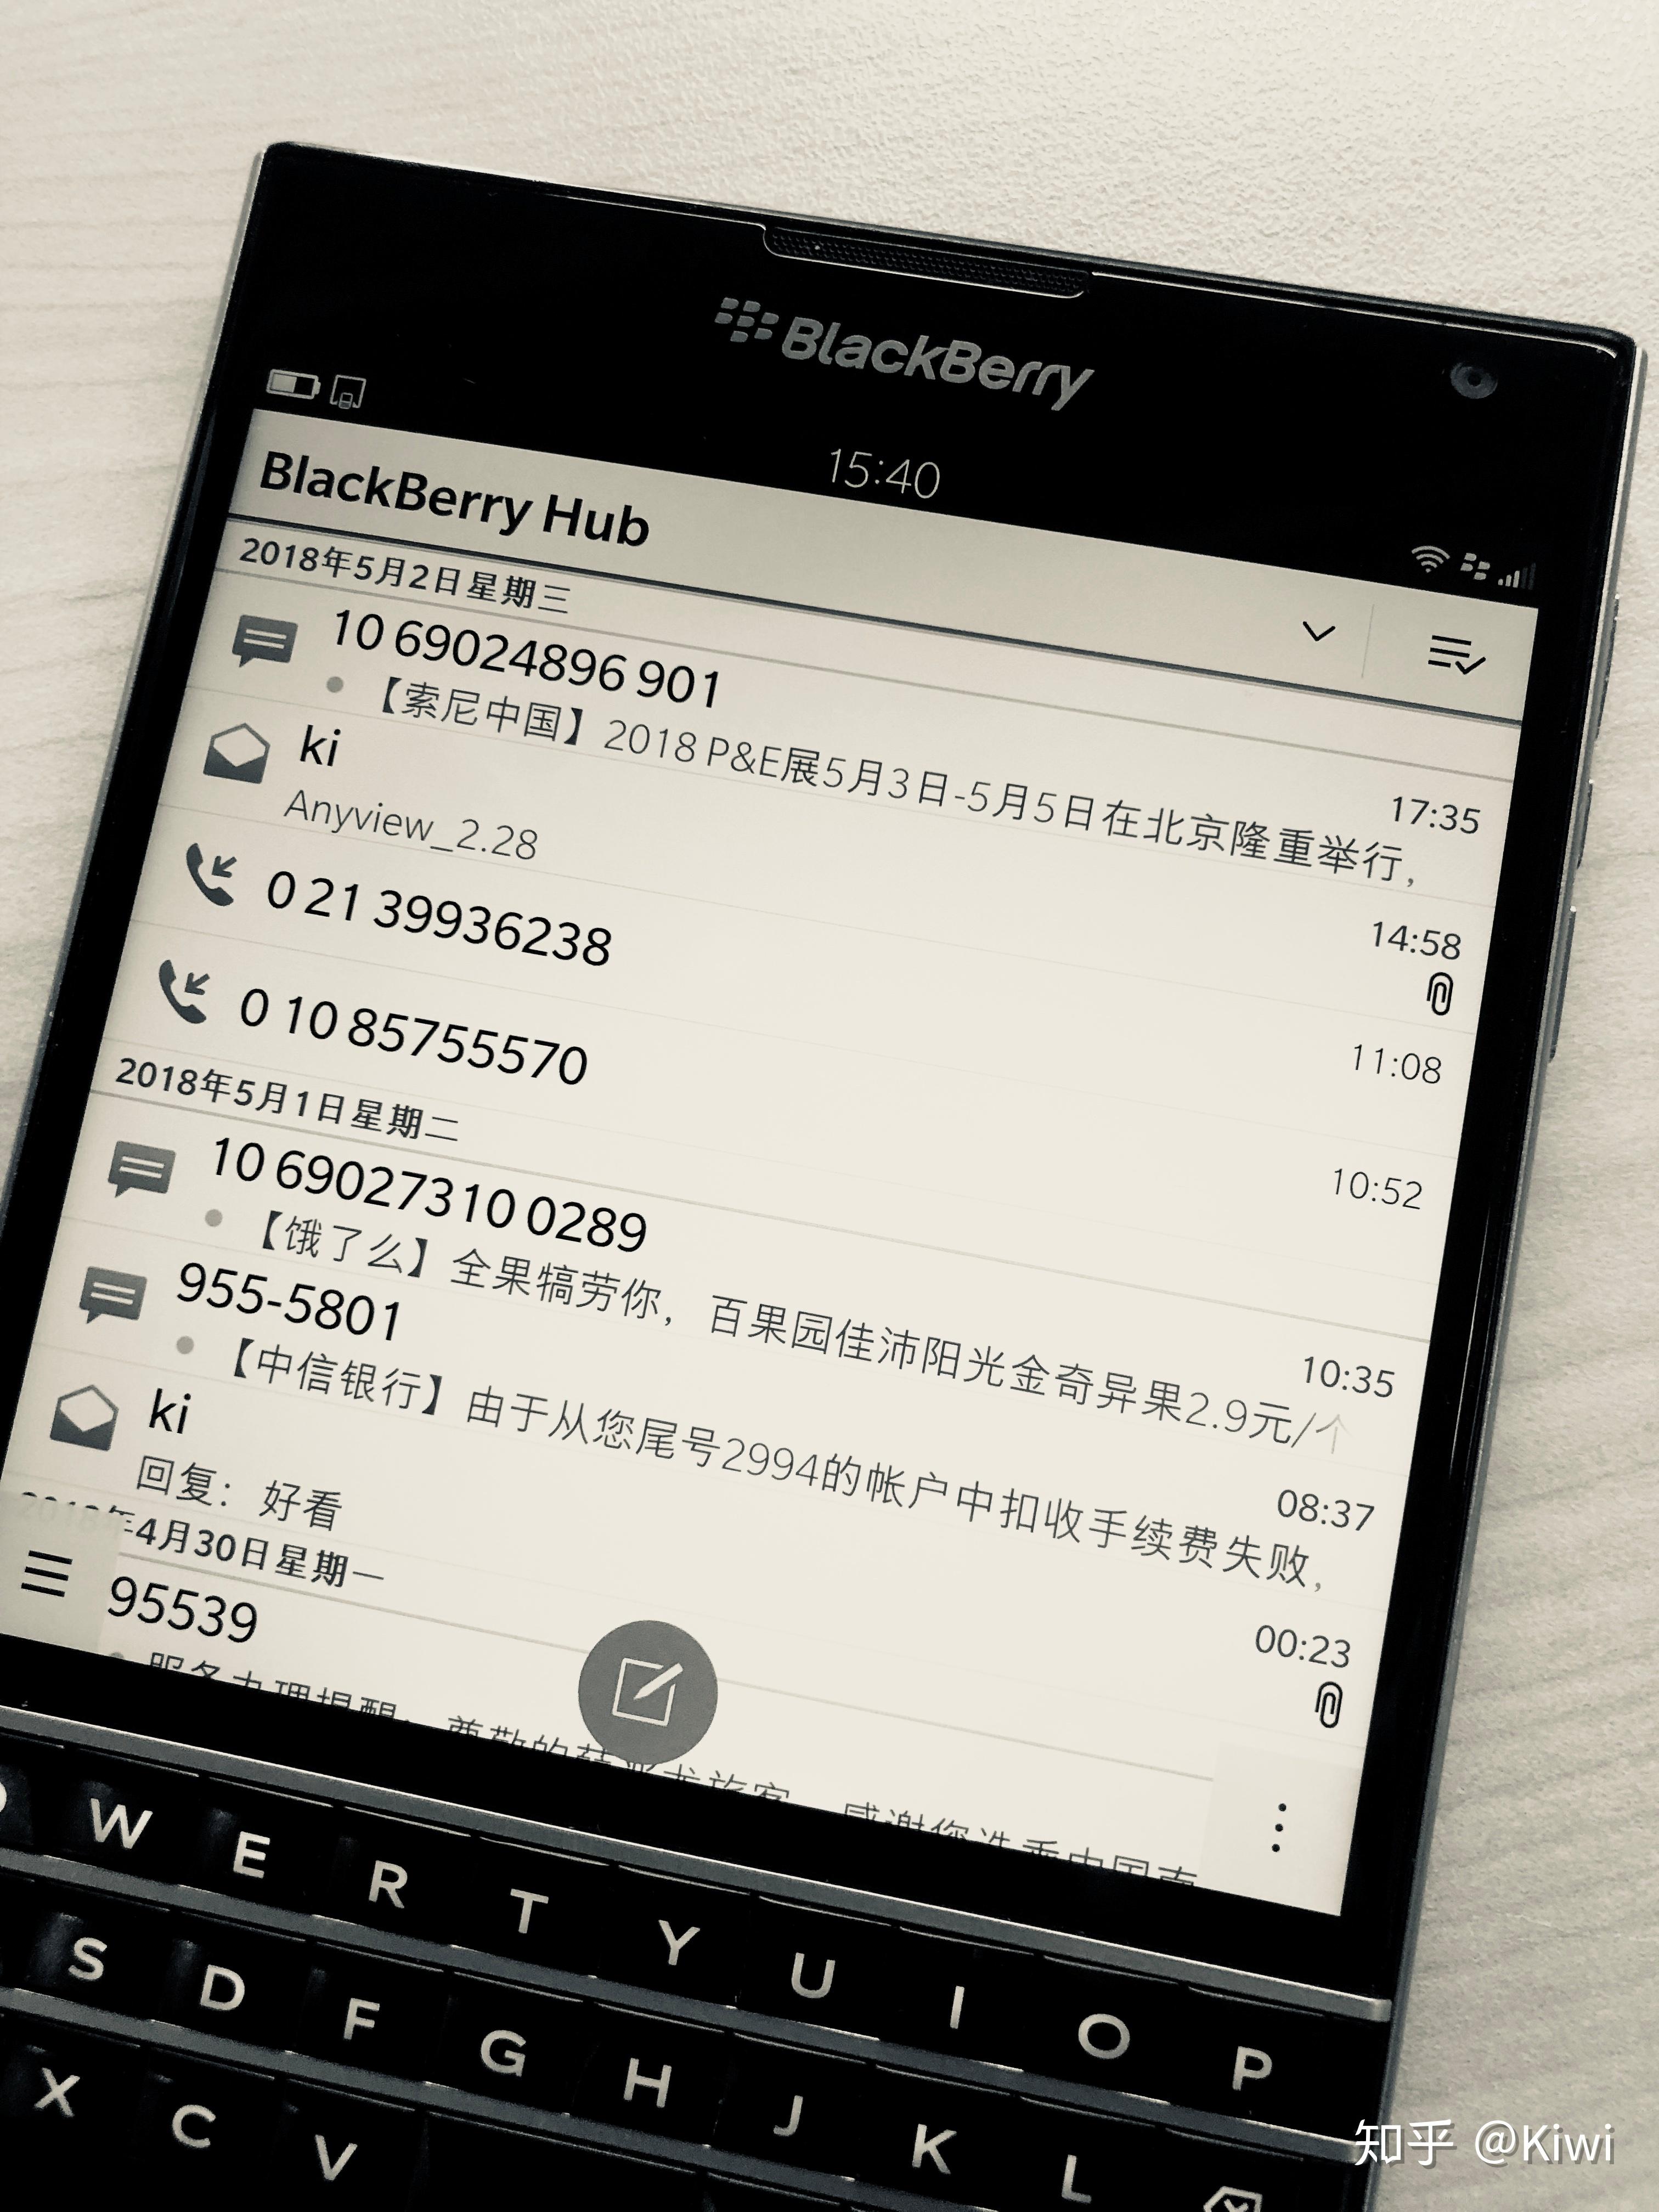 Every Smart Phone Lovers Must Know 8 Key Features Of New Blackberry Passport Device - Top Life ...